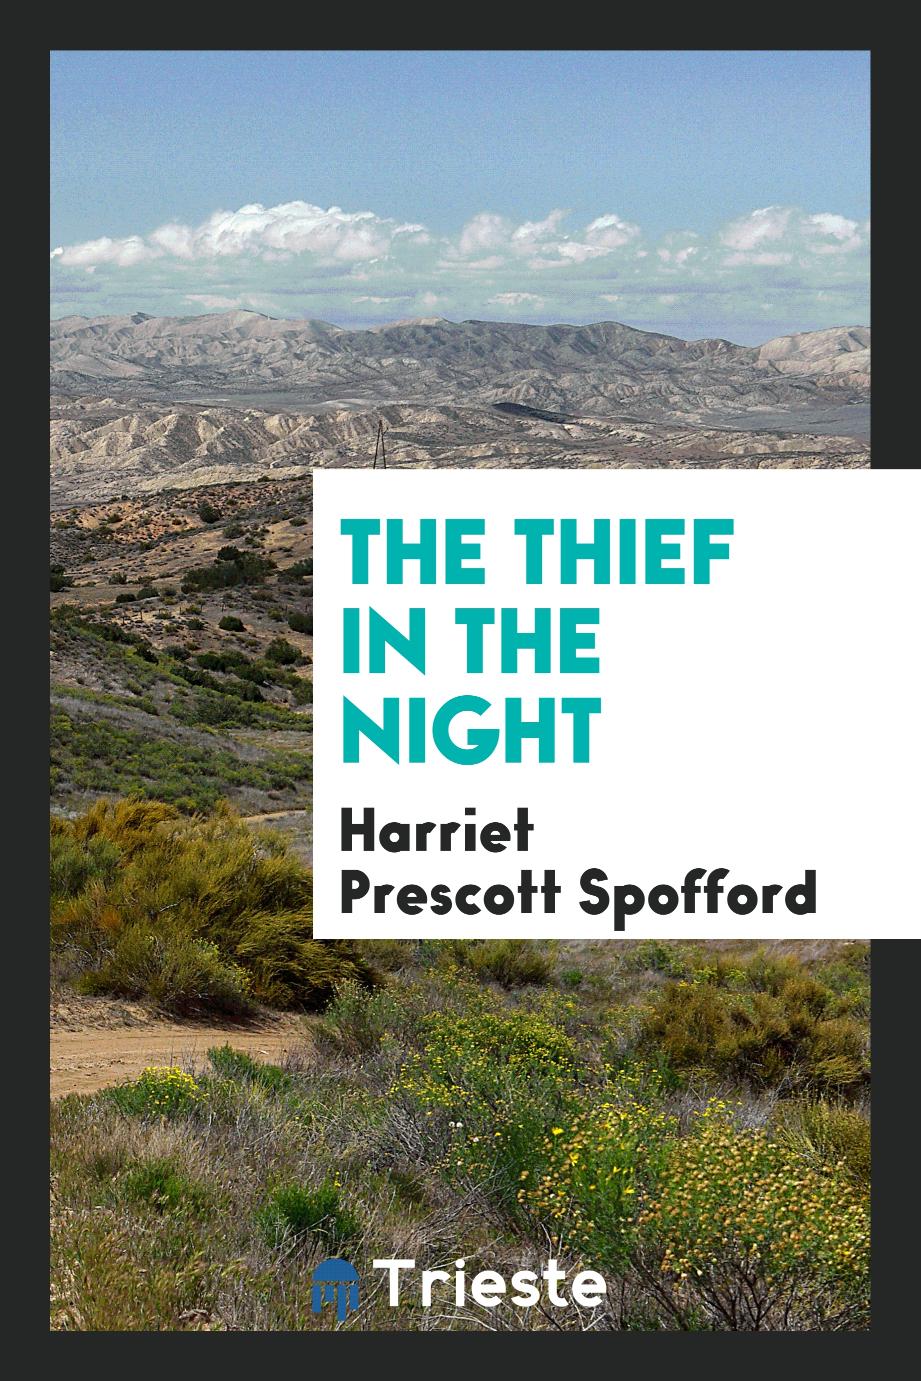 The thief in the night